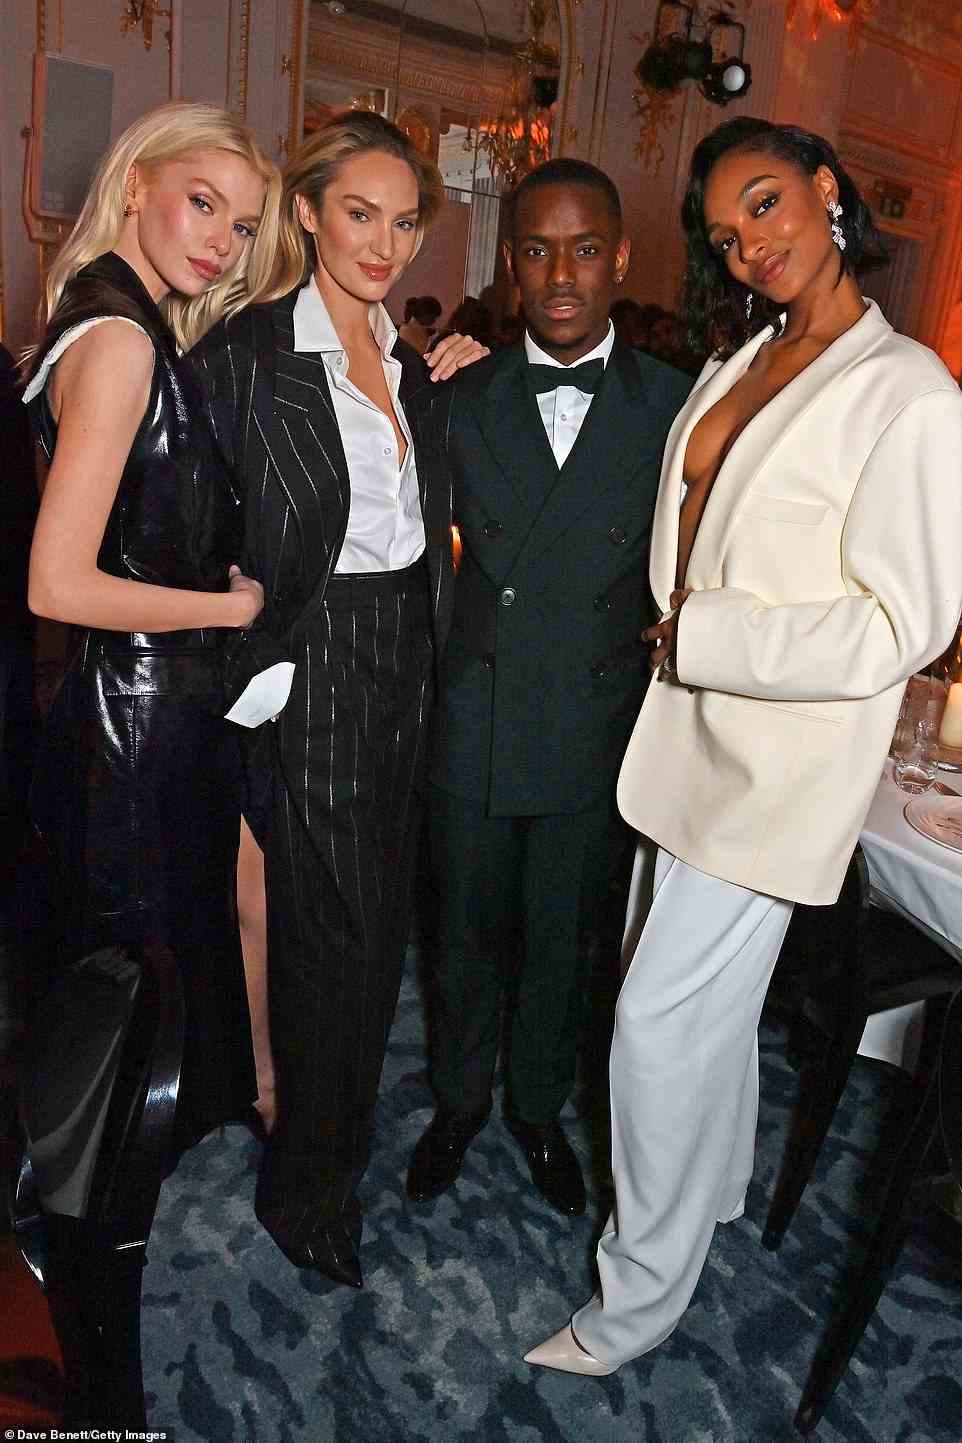 Suit club: Stella Maxwell, Candice Swanepoel, Micheal Ward and Jourdan Dunn all looked sensational in smart ensembles for the event